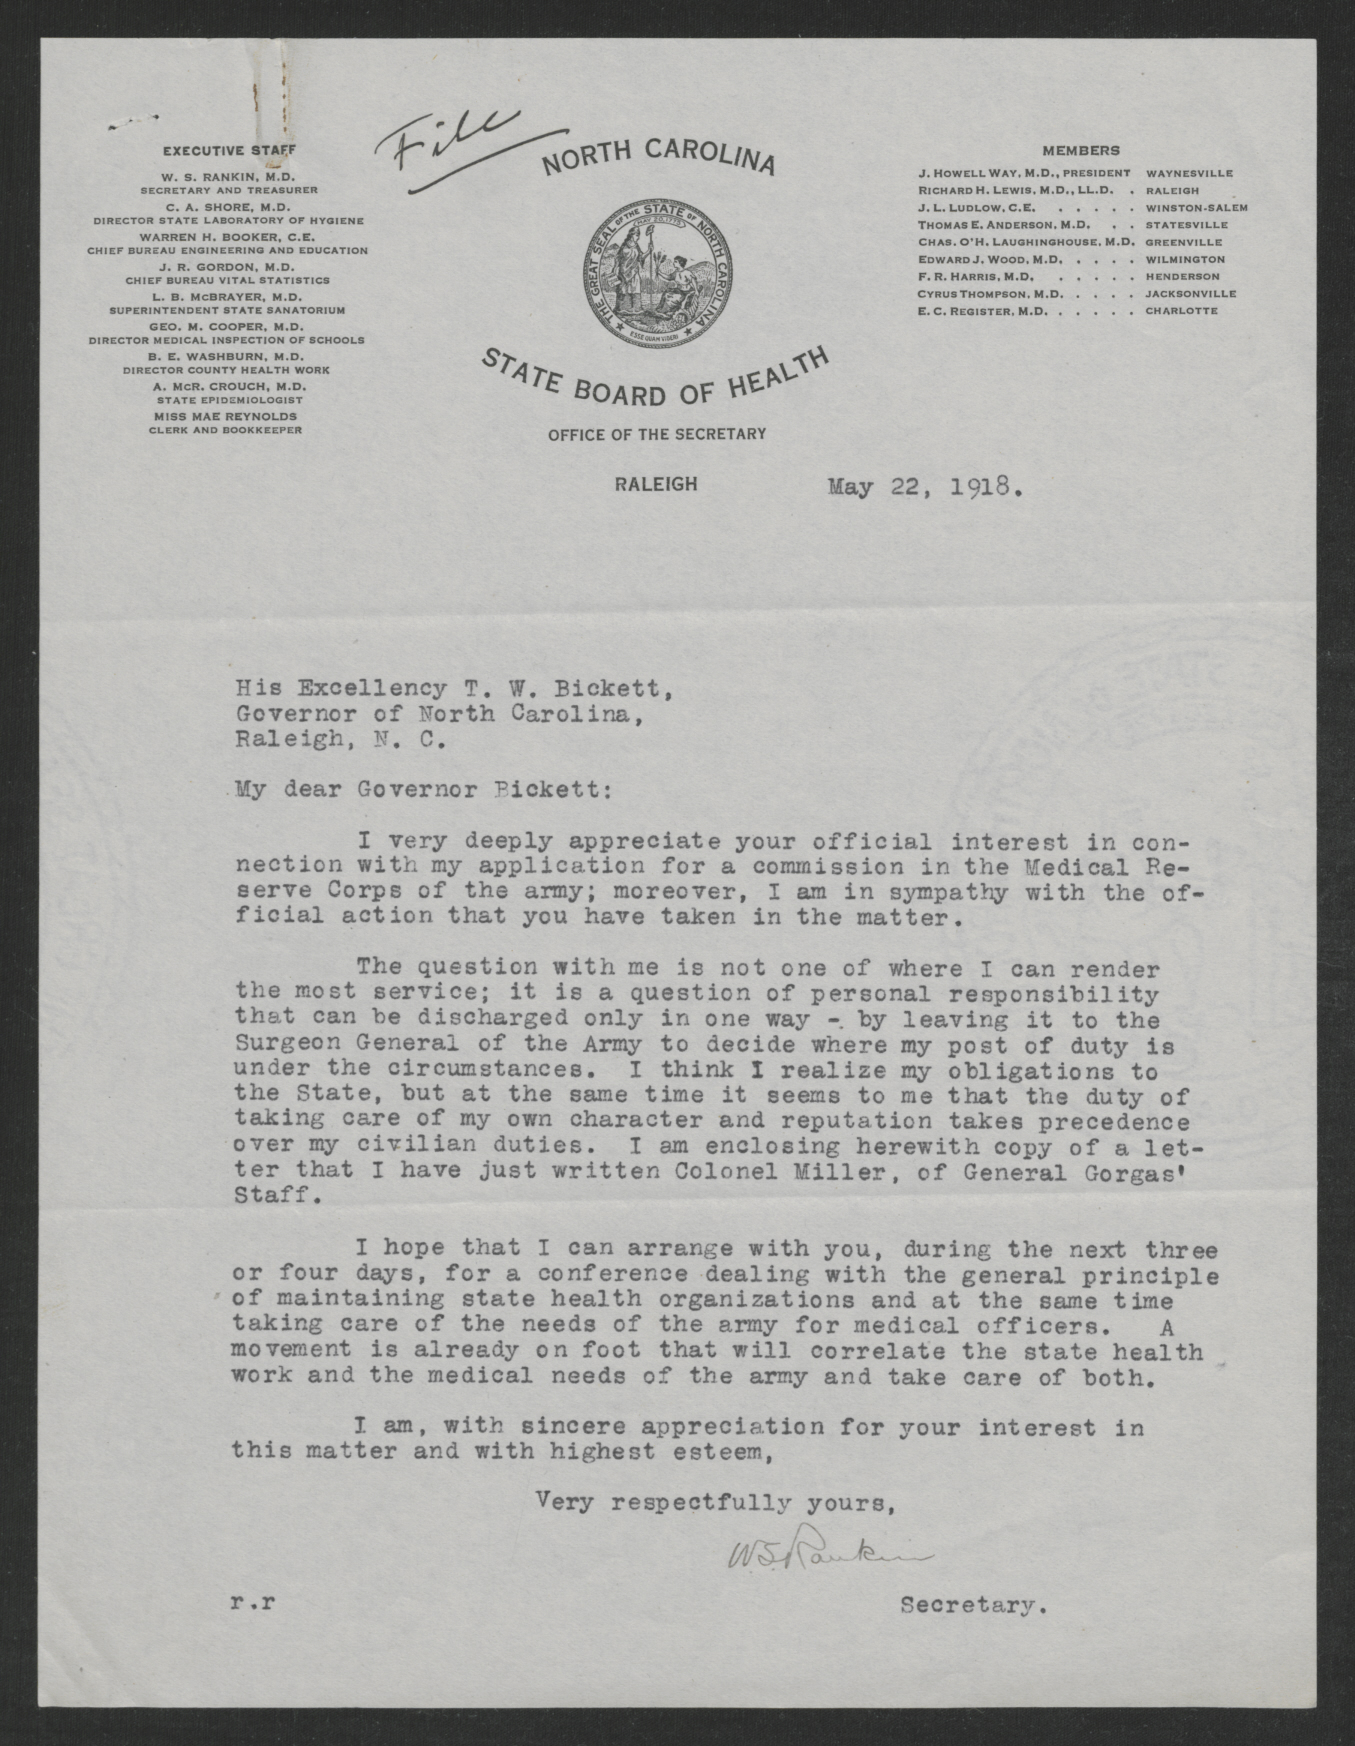 Letter from Watson S. Rankin to Thomas W. Bickett, May 22, 1918